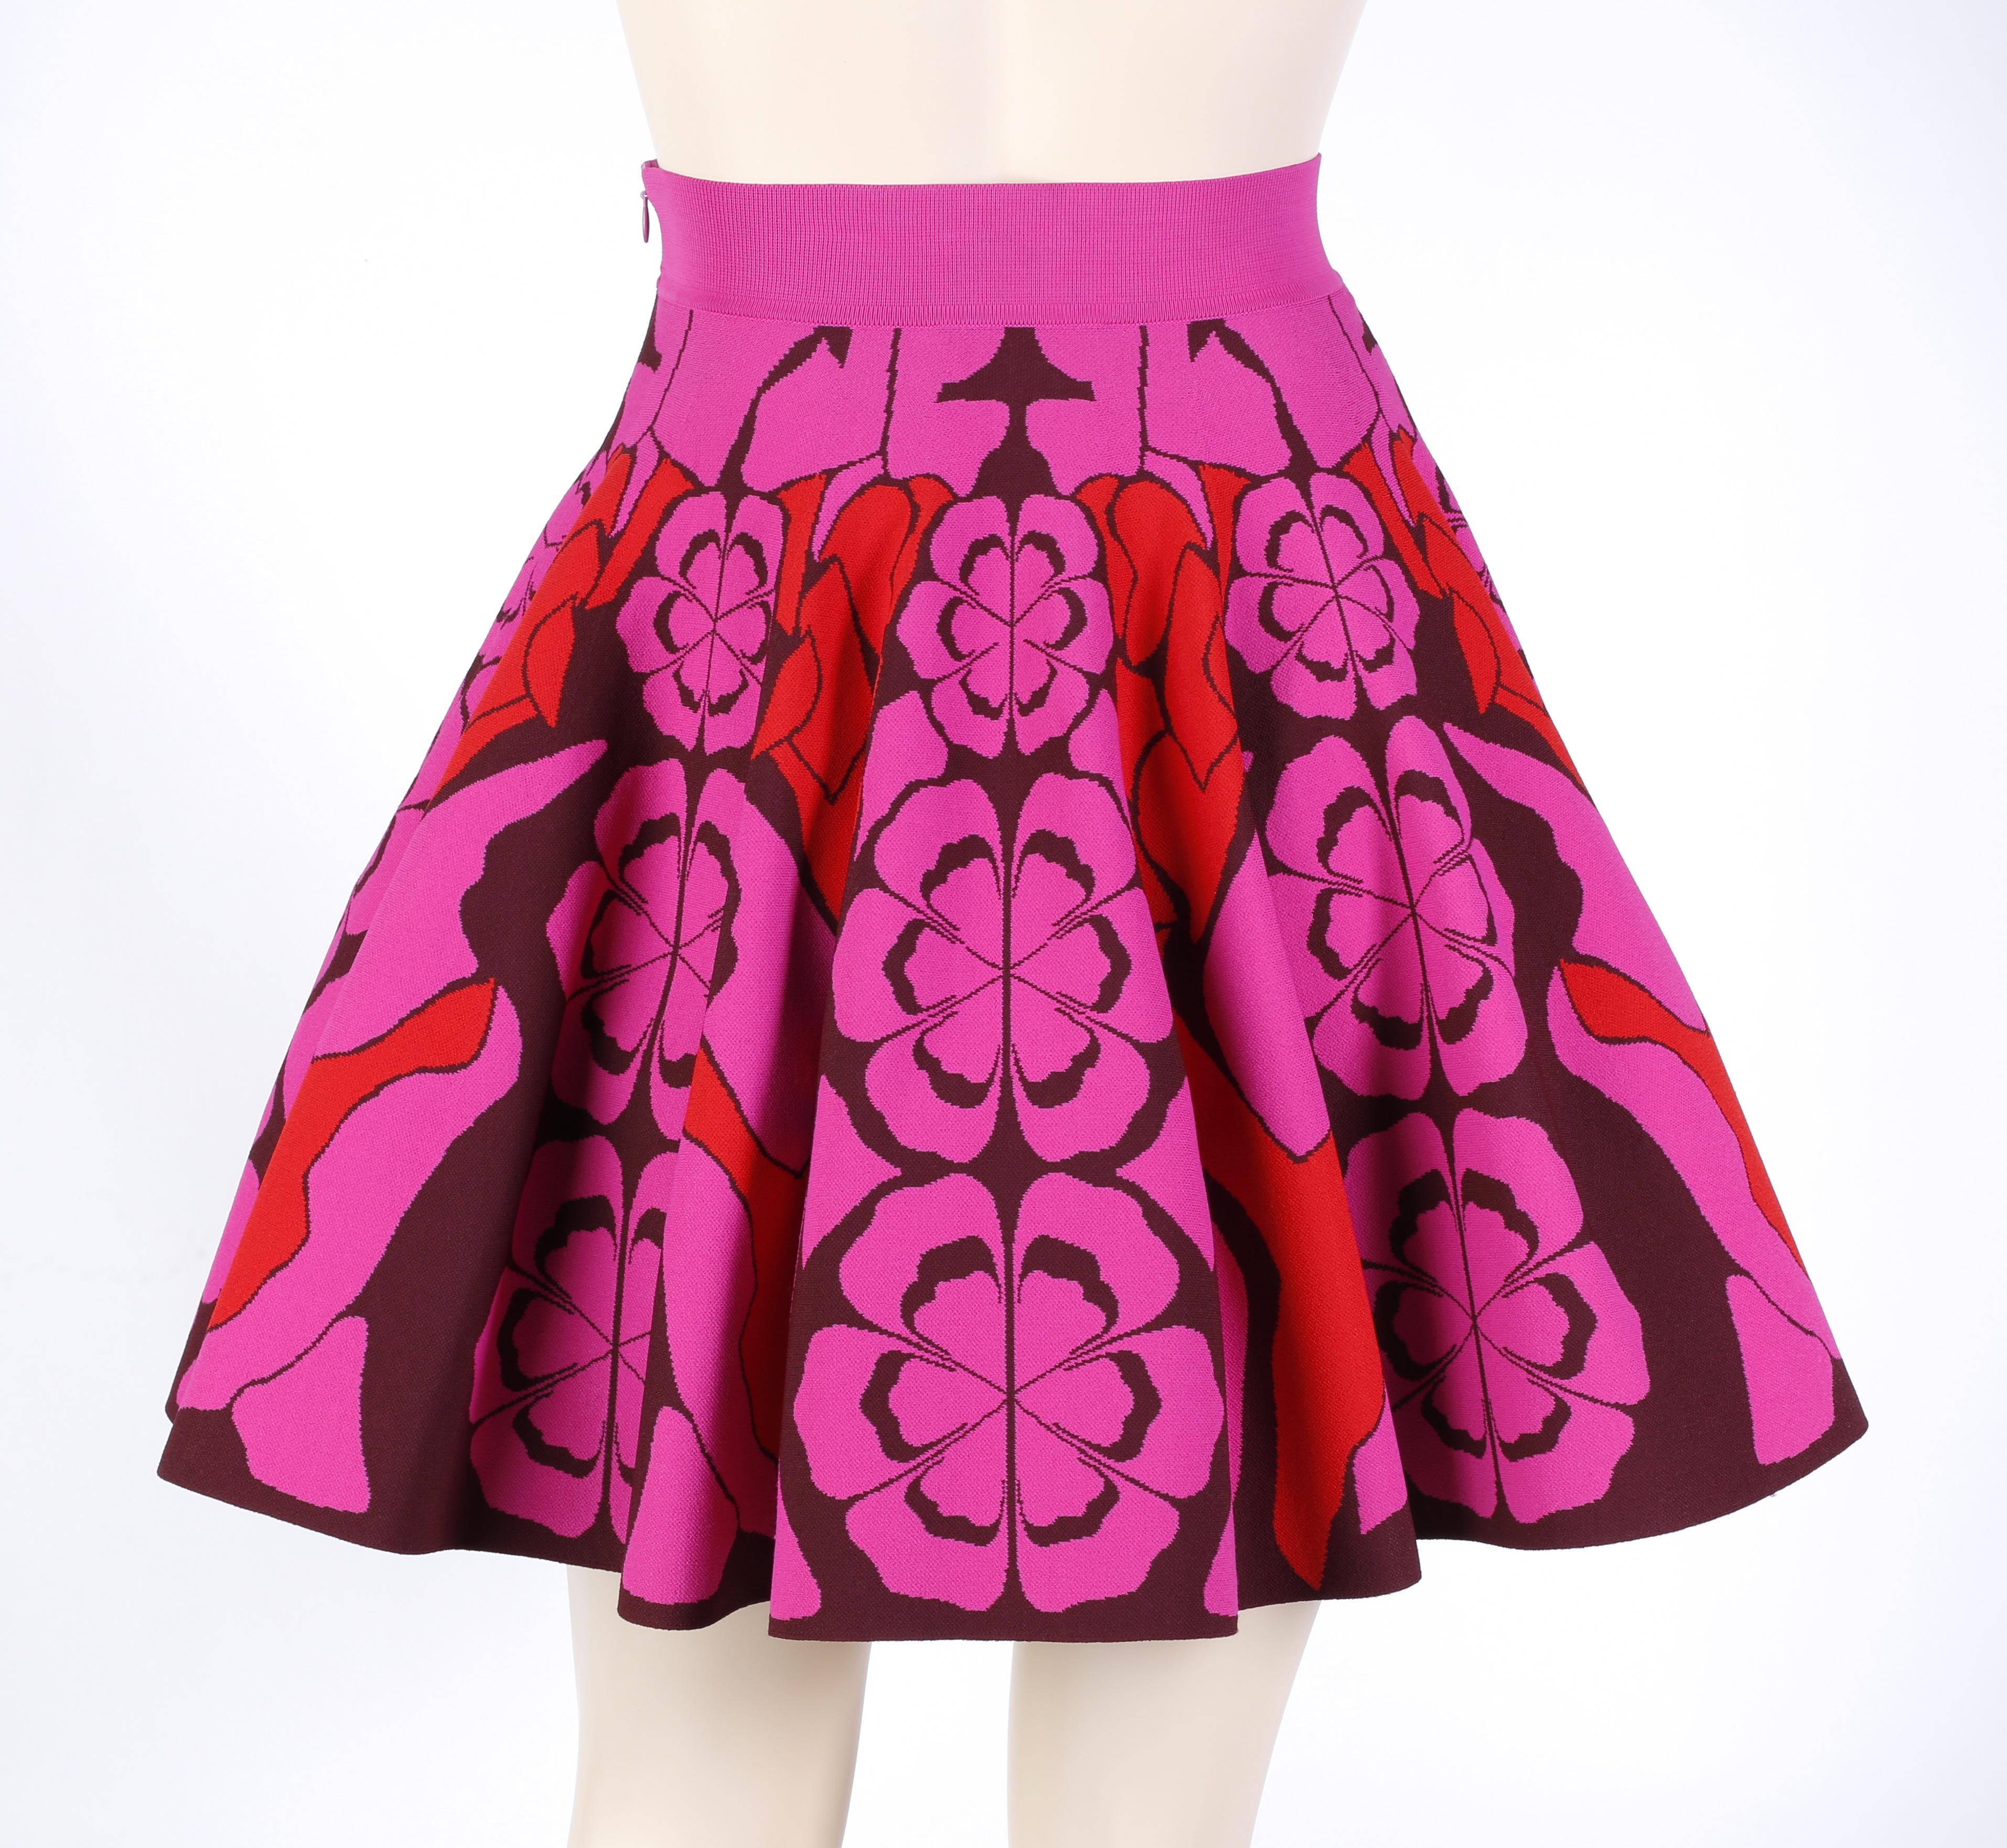 Alexander McQueen Resort 2015 Flower Kaleidoscope Pleated Flair Mini Skirt XS In Good Condition For Sale In Chicago, IL